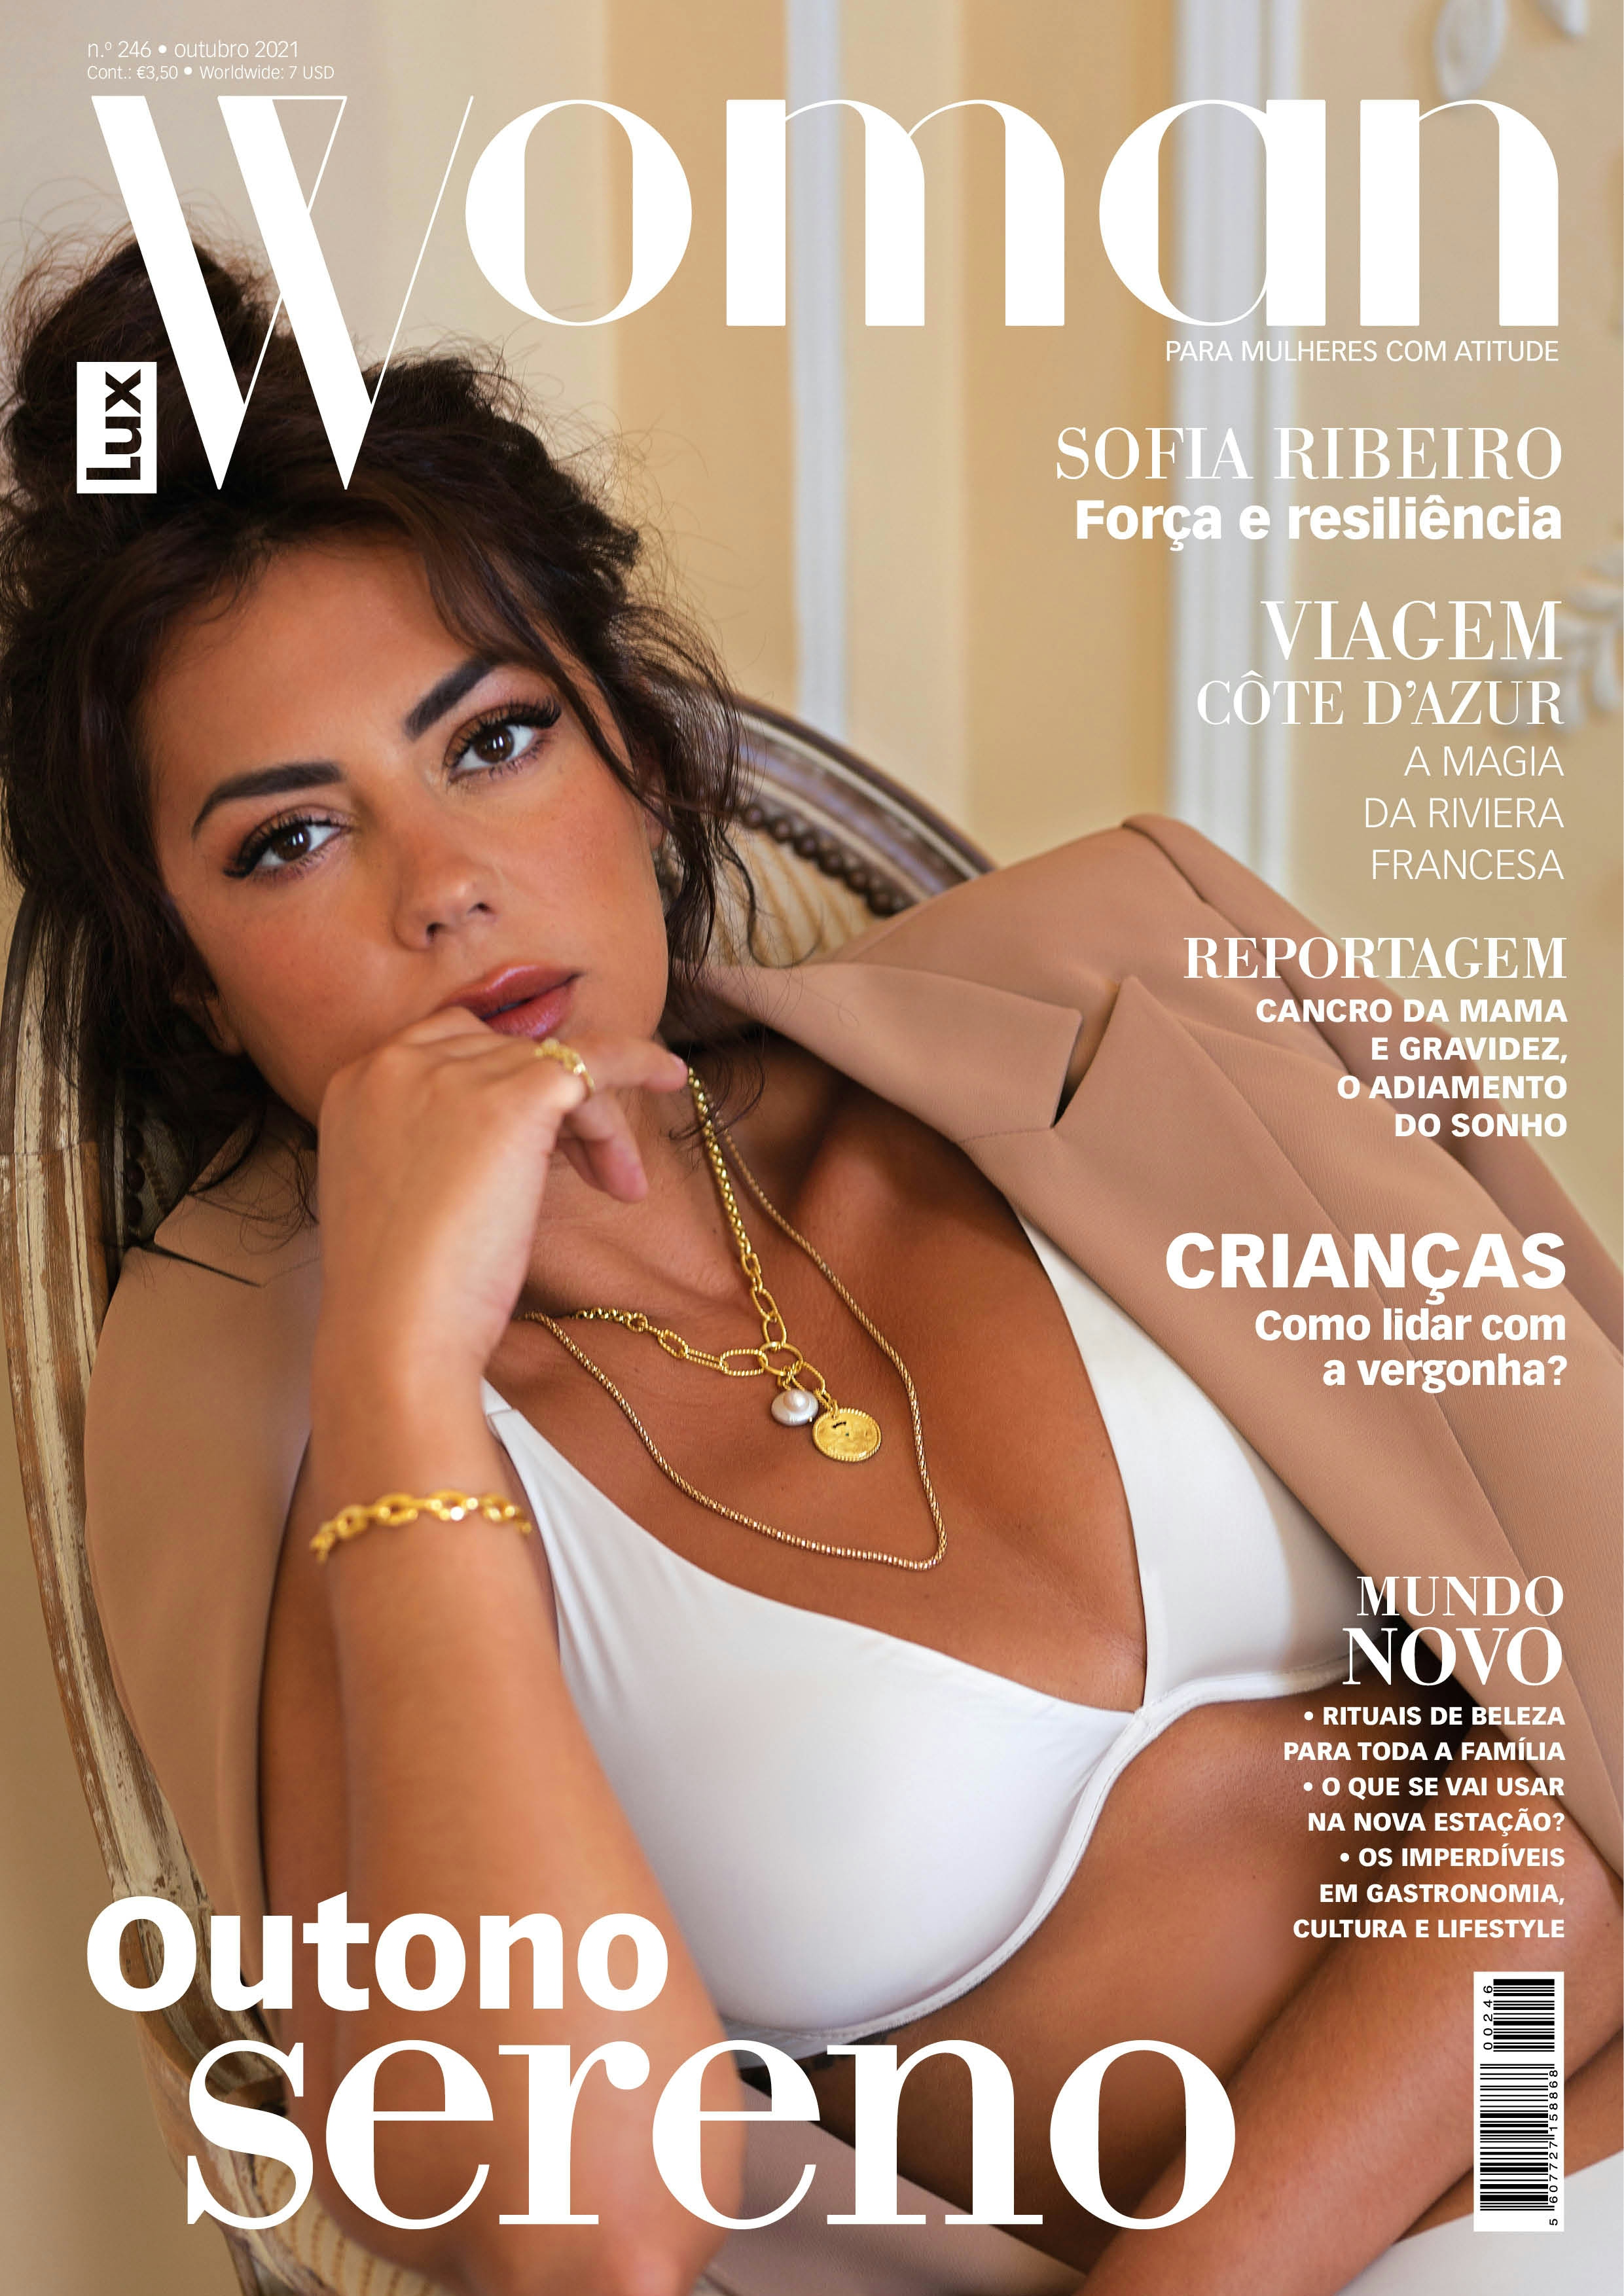 Actress Sofia Ribeiro on the front cover of luxwoman magazine wearing a white coat in a pastel cremy ambient 